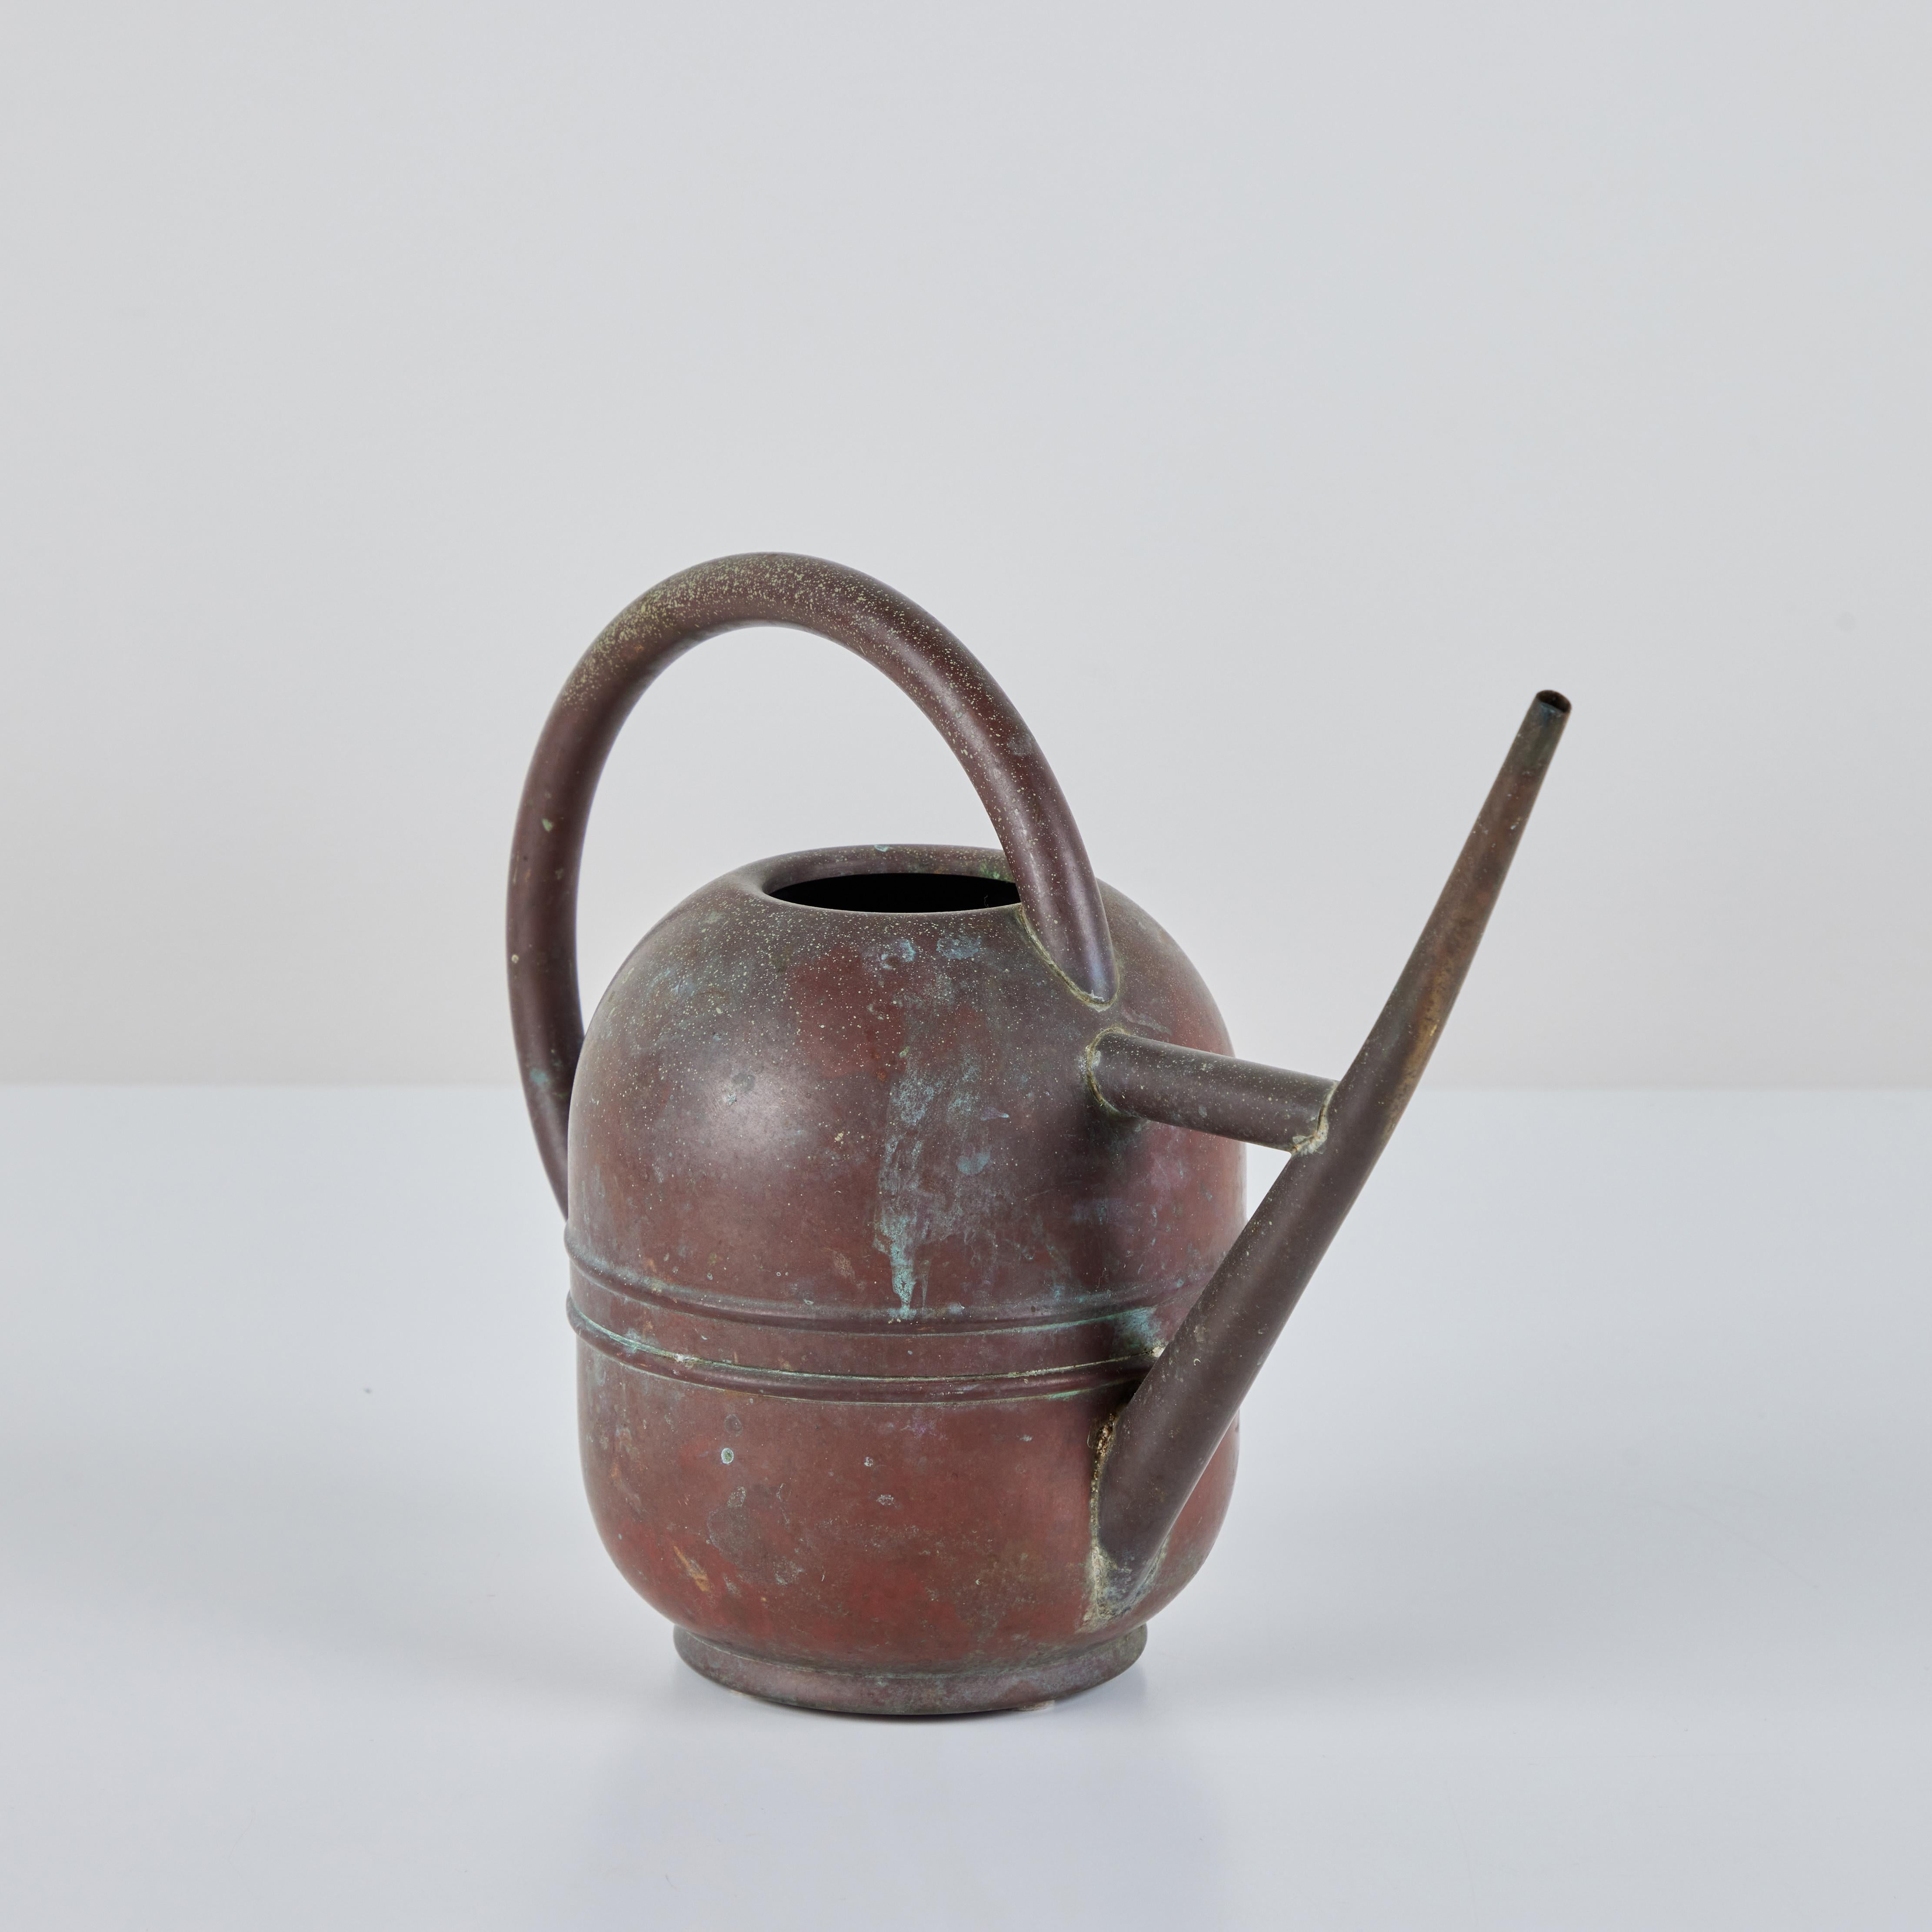 Patinated Art Deco Copper and Brass Watering Can by Chase